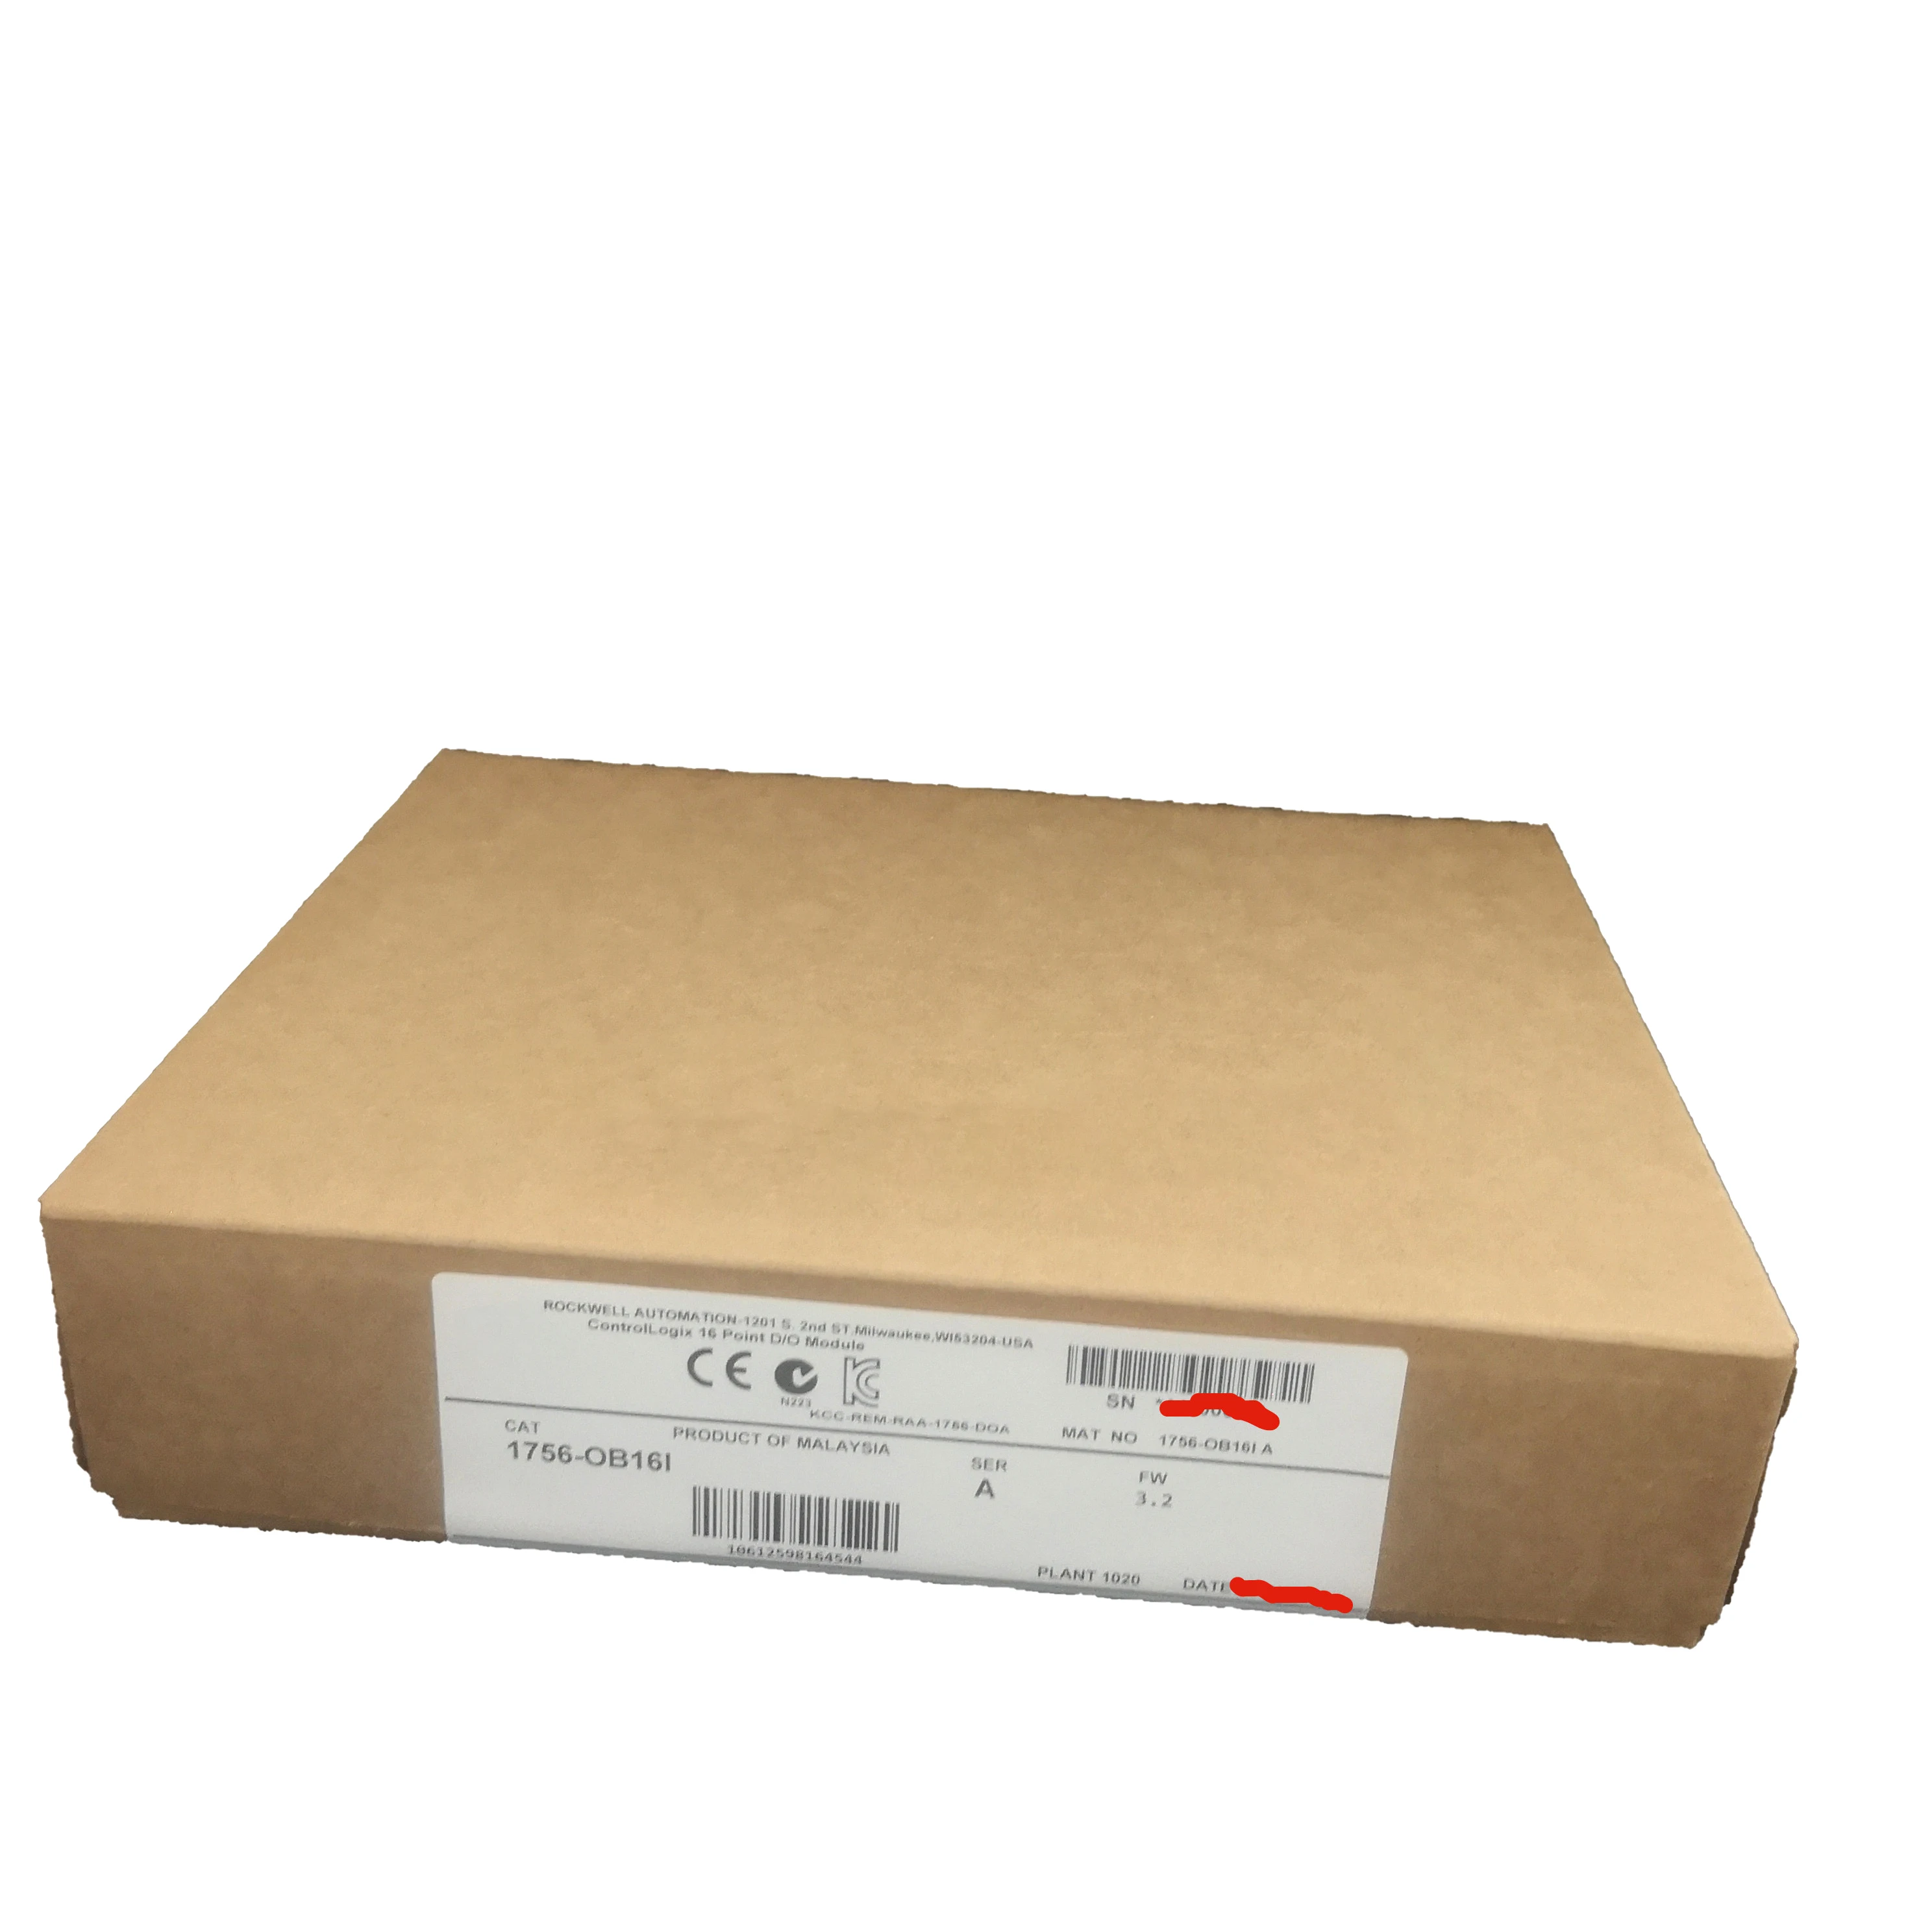 

New Original In BOX 1756-OB16I {Warehouse stock} 1 Year Warranty Shipment within 24 hours